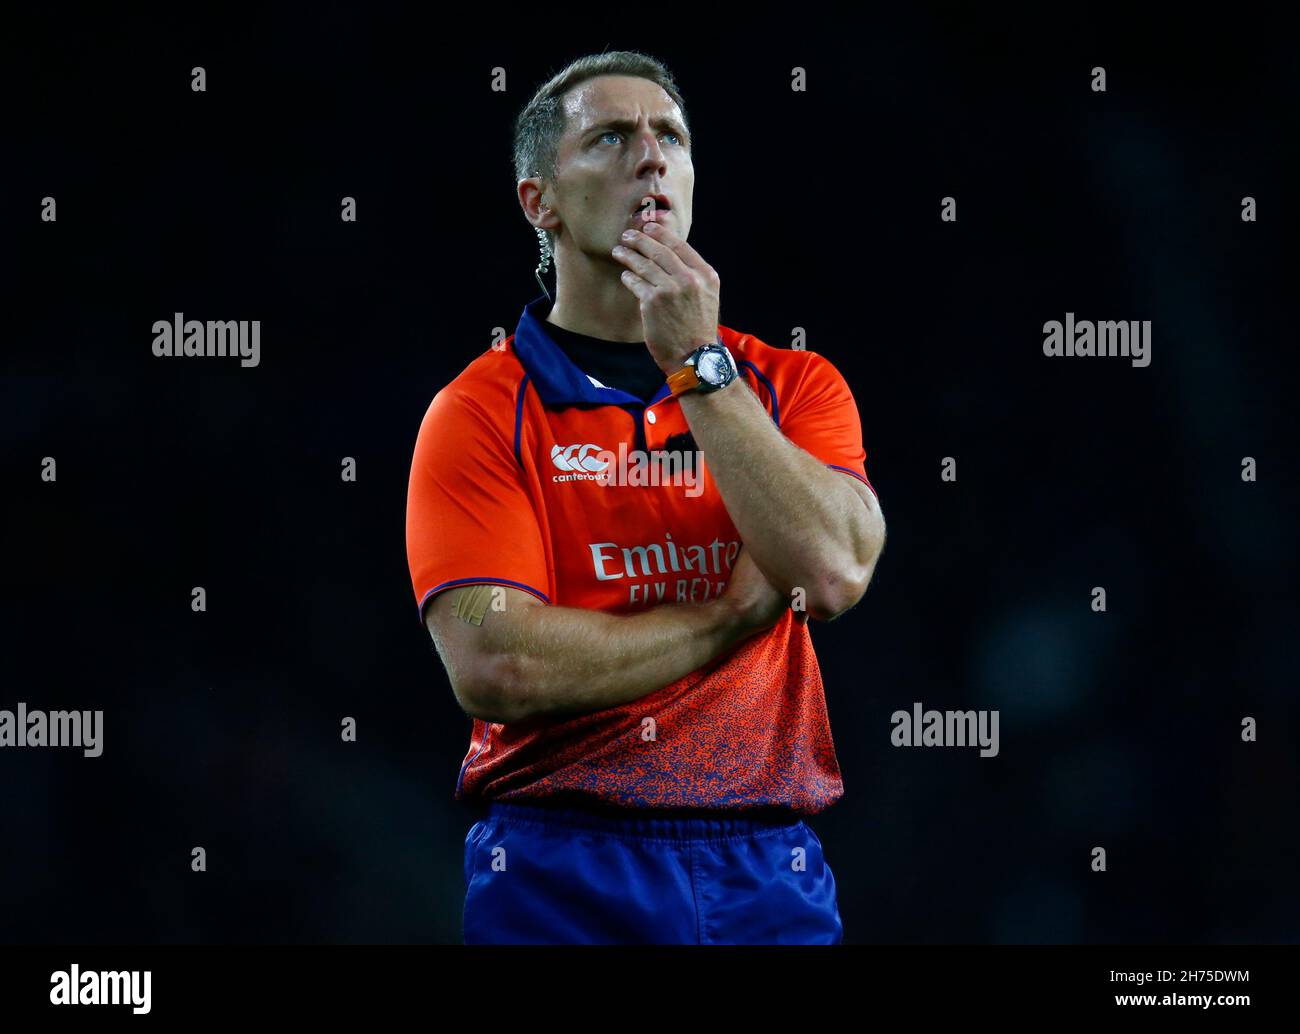 London, UK. 20th Nov, 2021. LONDON, ENGLAND - NOVEMBER 20: Referee Andrew Brace during Autumn International Series match between England and South Africa, at Twickenham Stadium on 20th November, 2021 in London, England Credit: Action Foto Sport/Alamy Live News Stock Photo